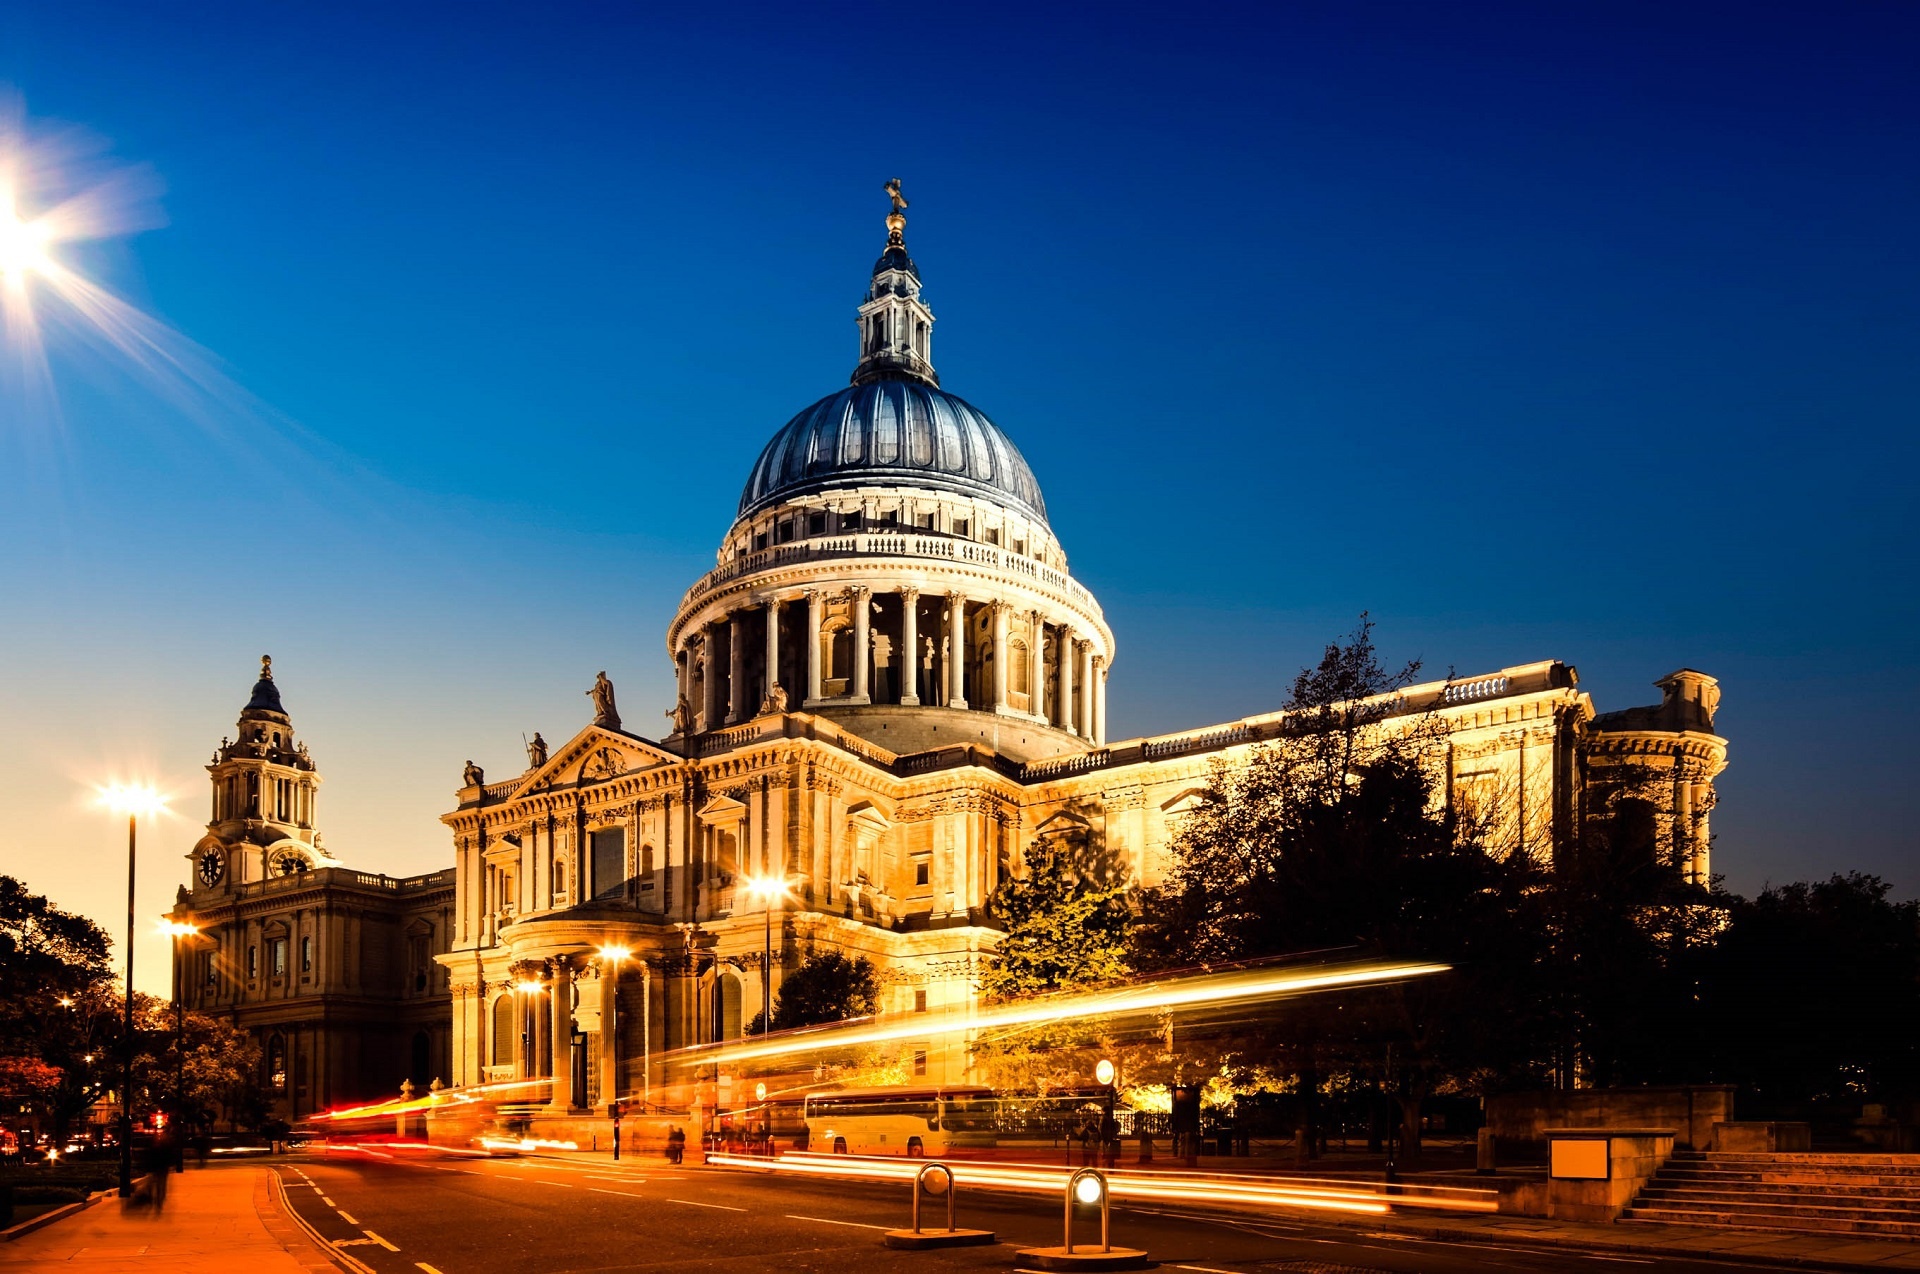 St. Paul's Cathedral, Latest HD wallpapers, Cathedrals, Saint Pauls Cathedral, 1920x1280 HD Desktop